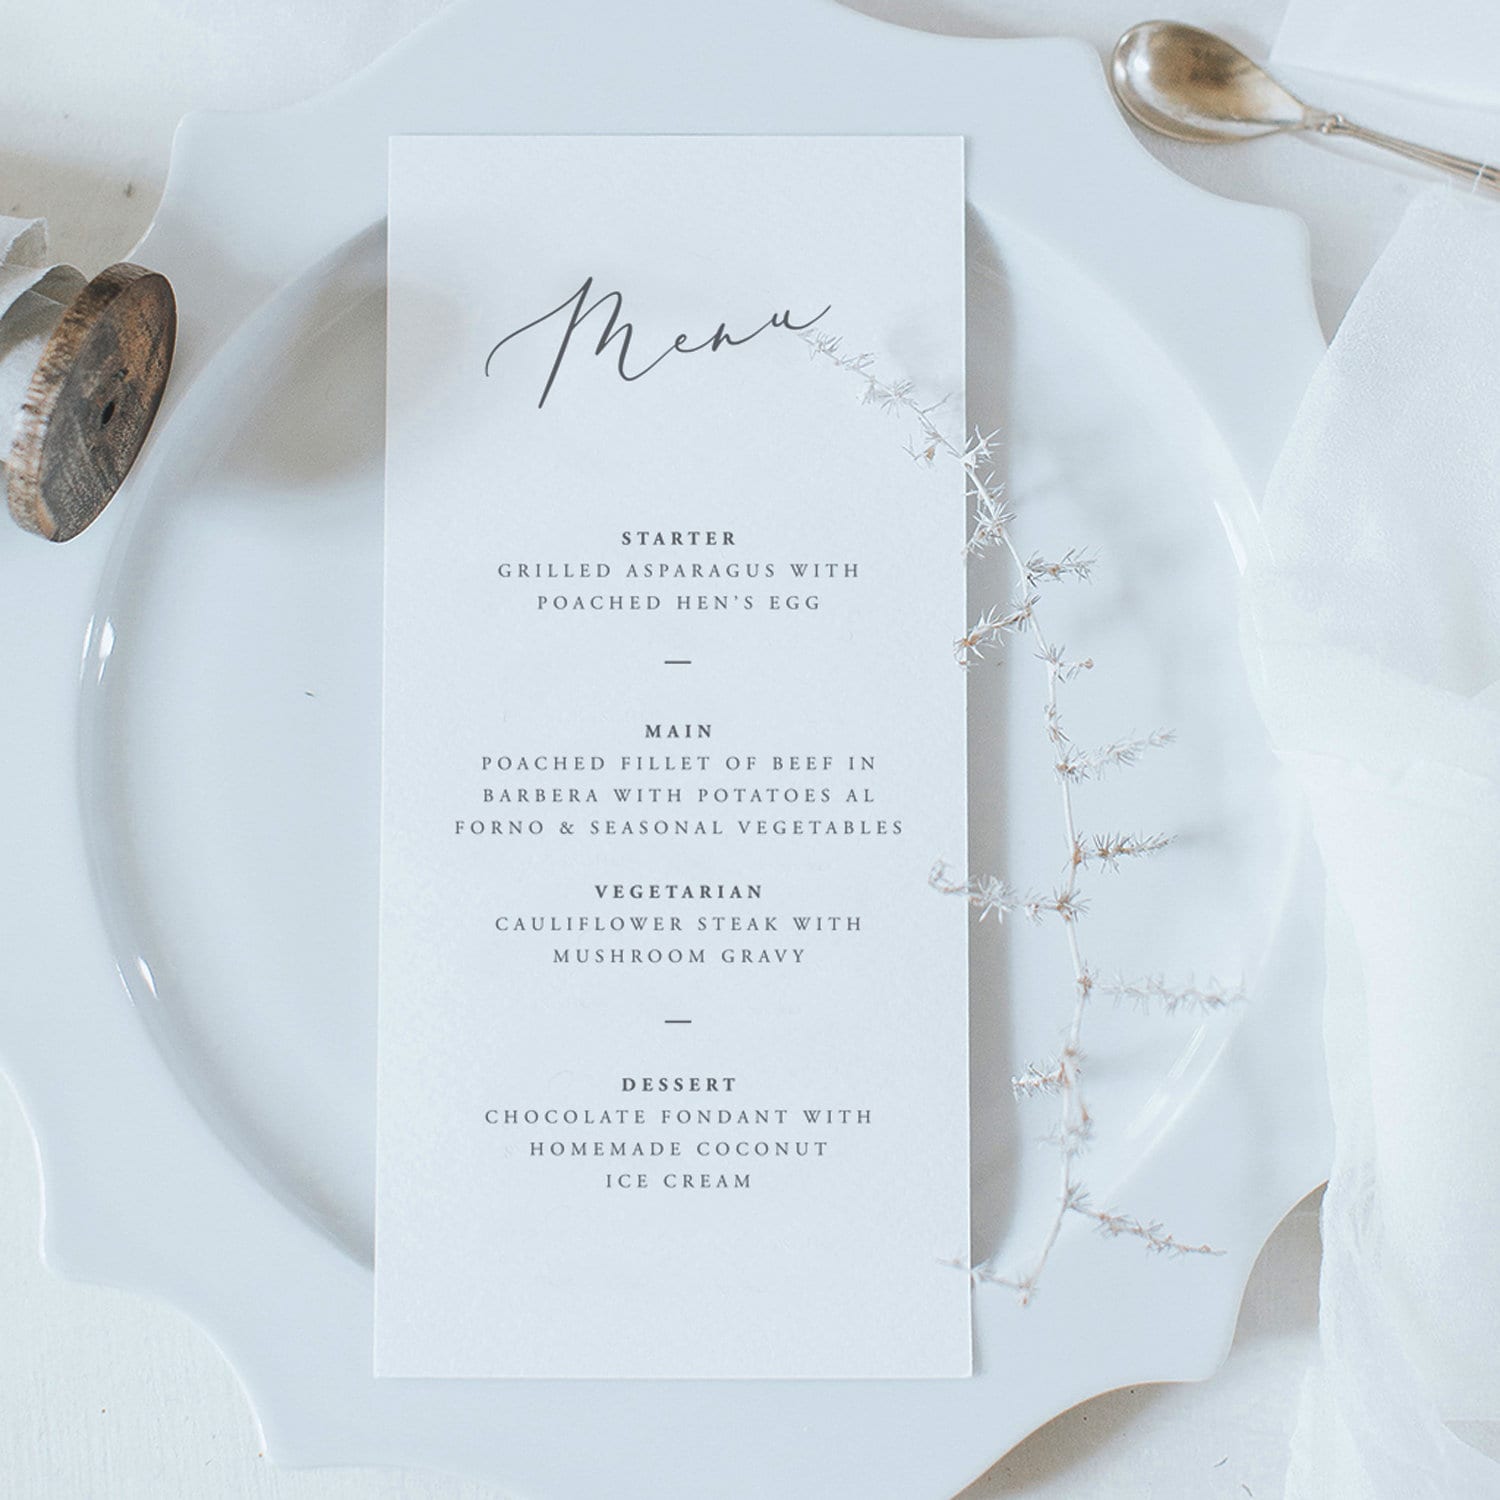 Wedding Dinner Menu With Simple Free-Flowing Font - Place Setting Printed Card